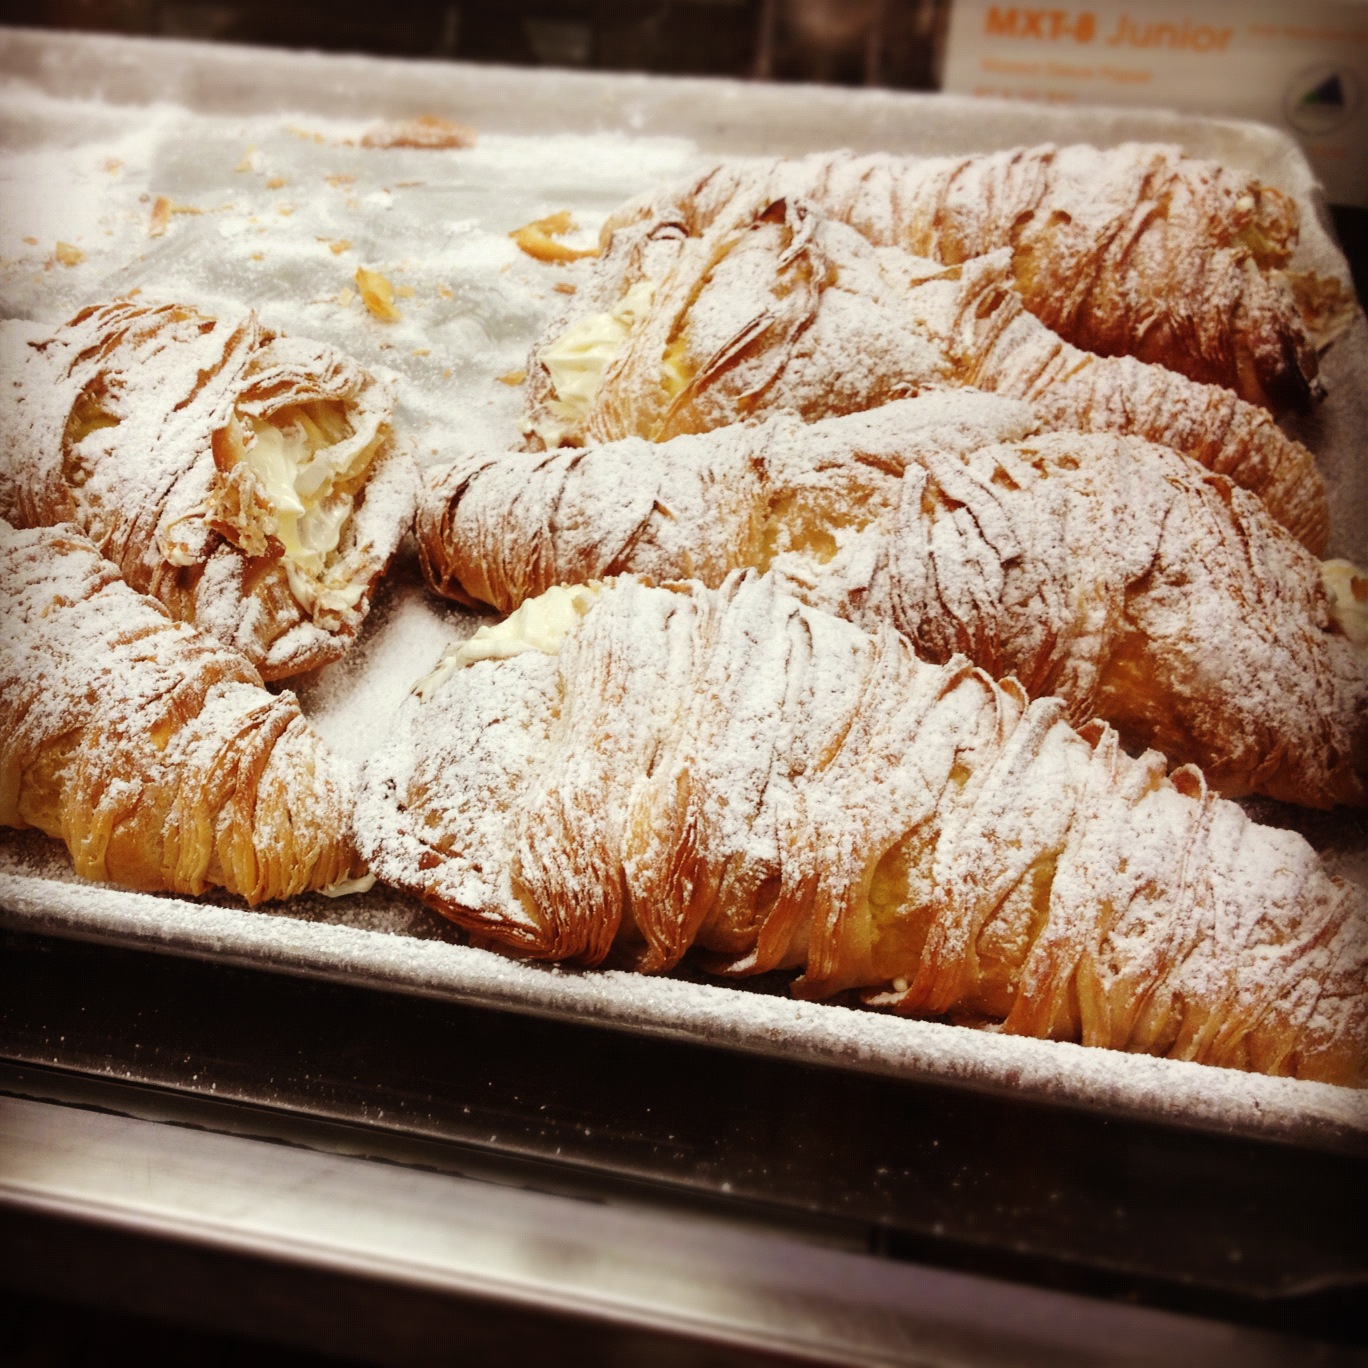 The famous "lobster tail" pastries at Caputo's Bakery in Carroll Gardens.